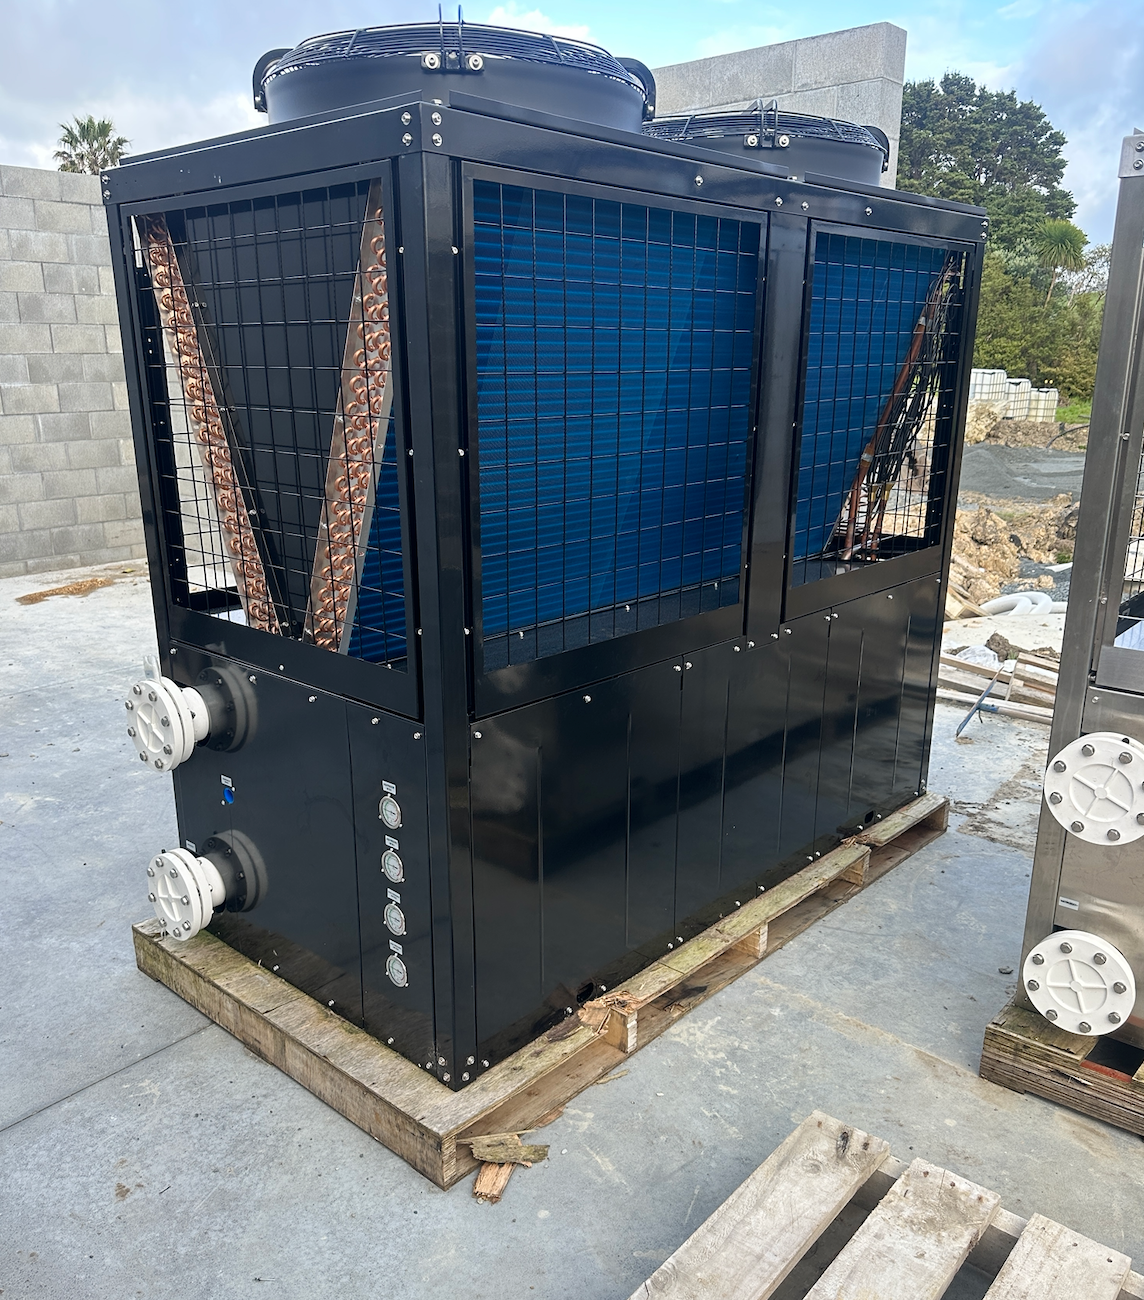 Astral Pool commercial 58KW Heat Pump